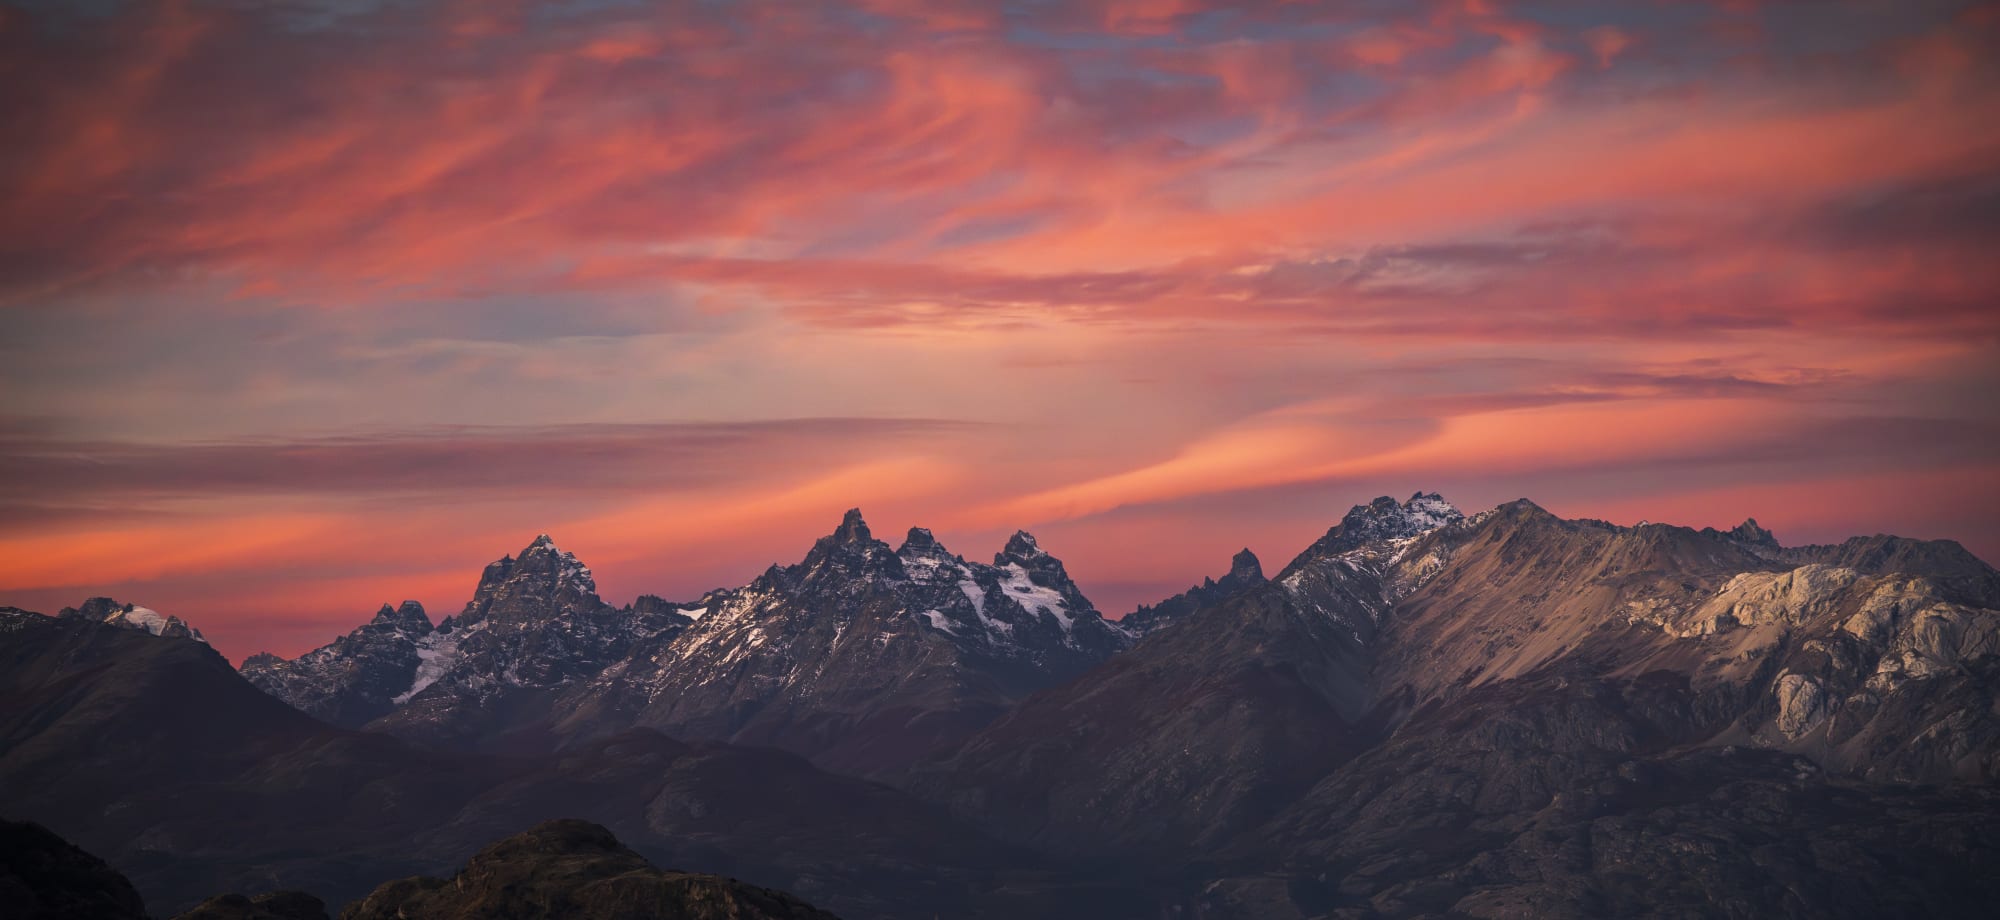 A red sky backs staggering mountains with snow.